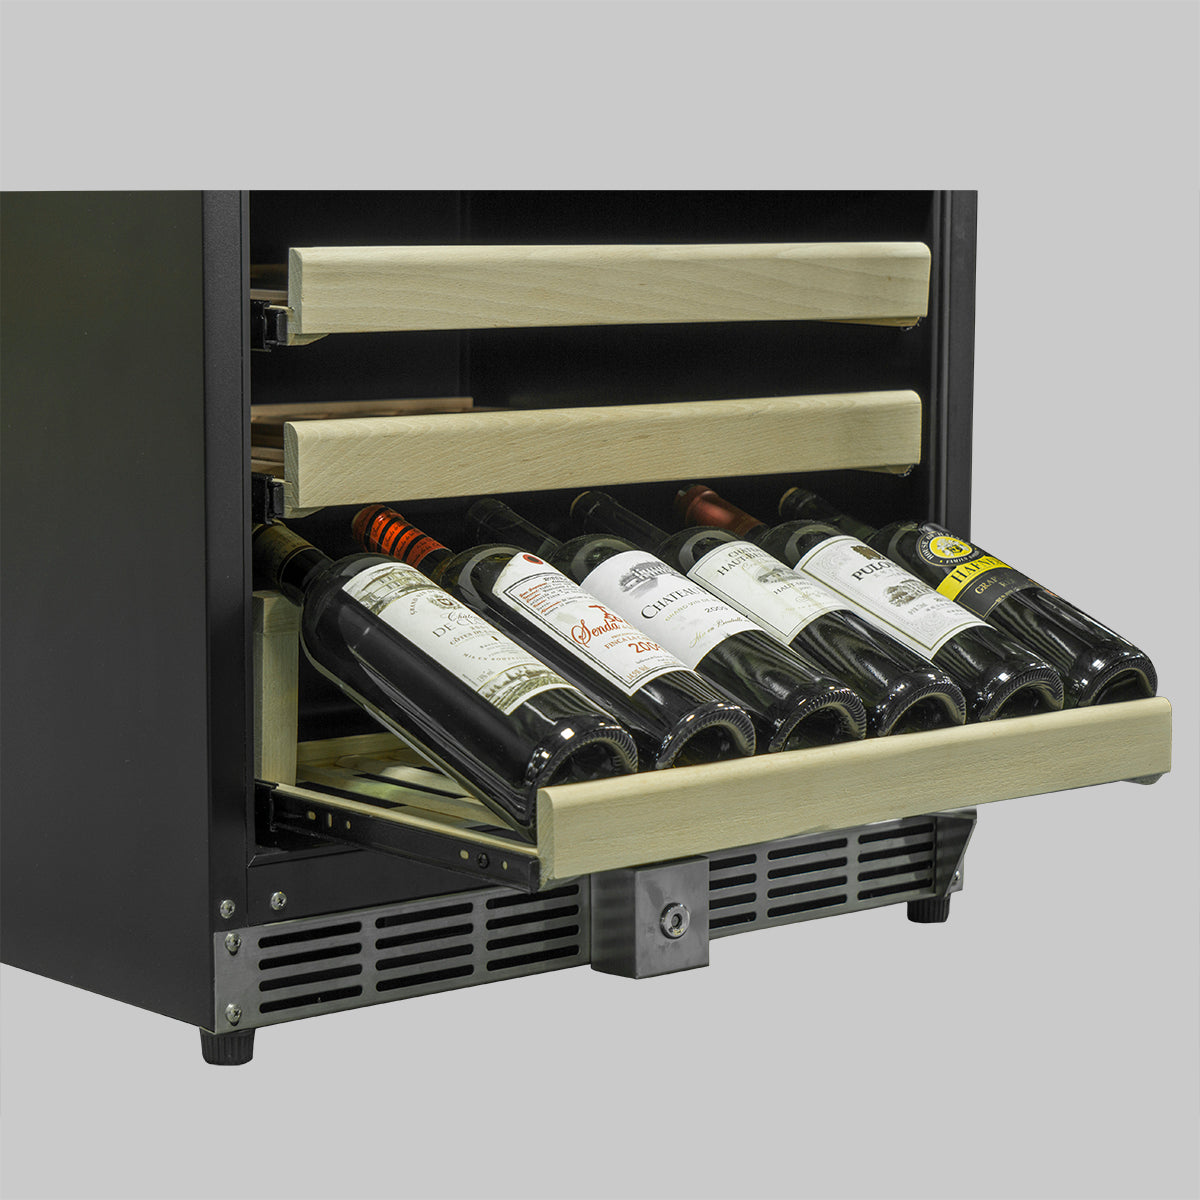 A 3-zone wine cooler and beverage fridge with bottles of wine.